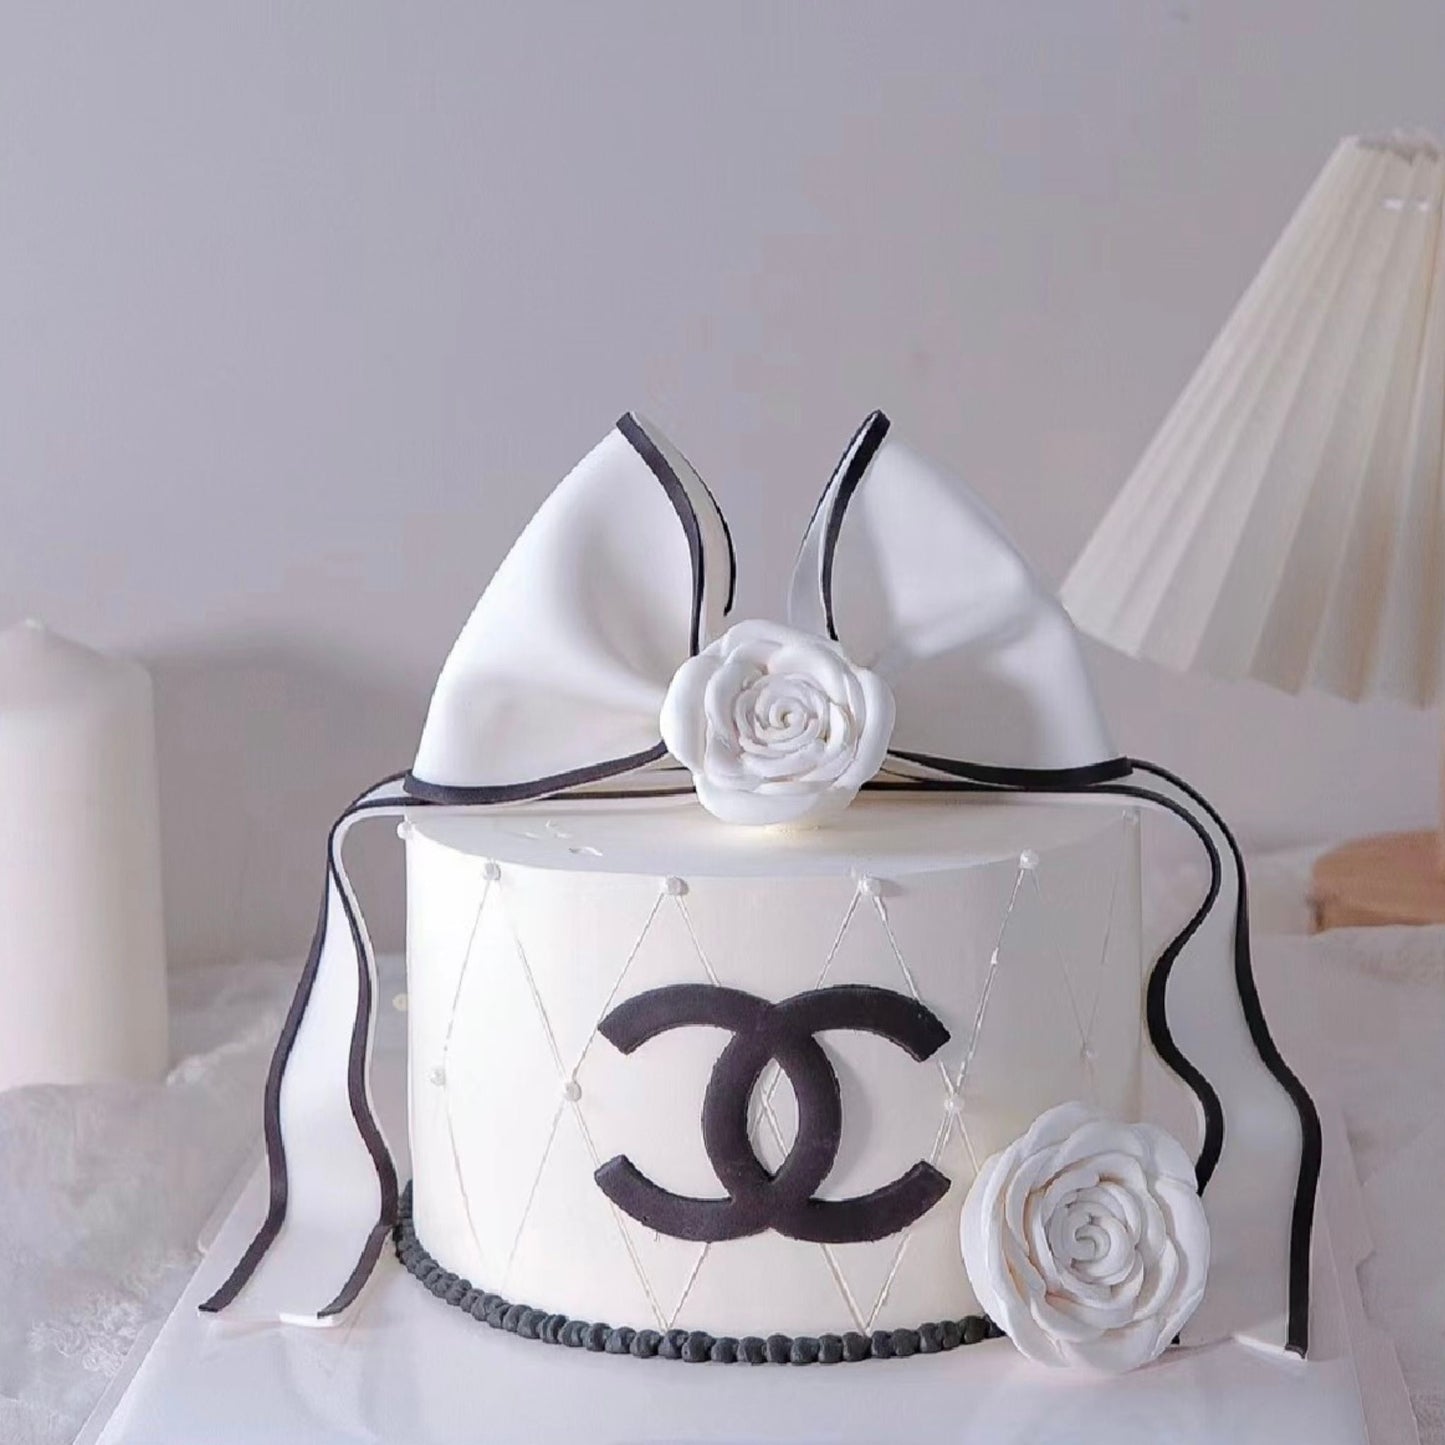 6 inch White Channel Cake